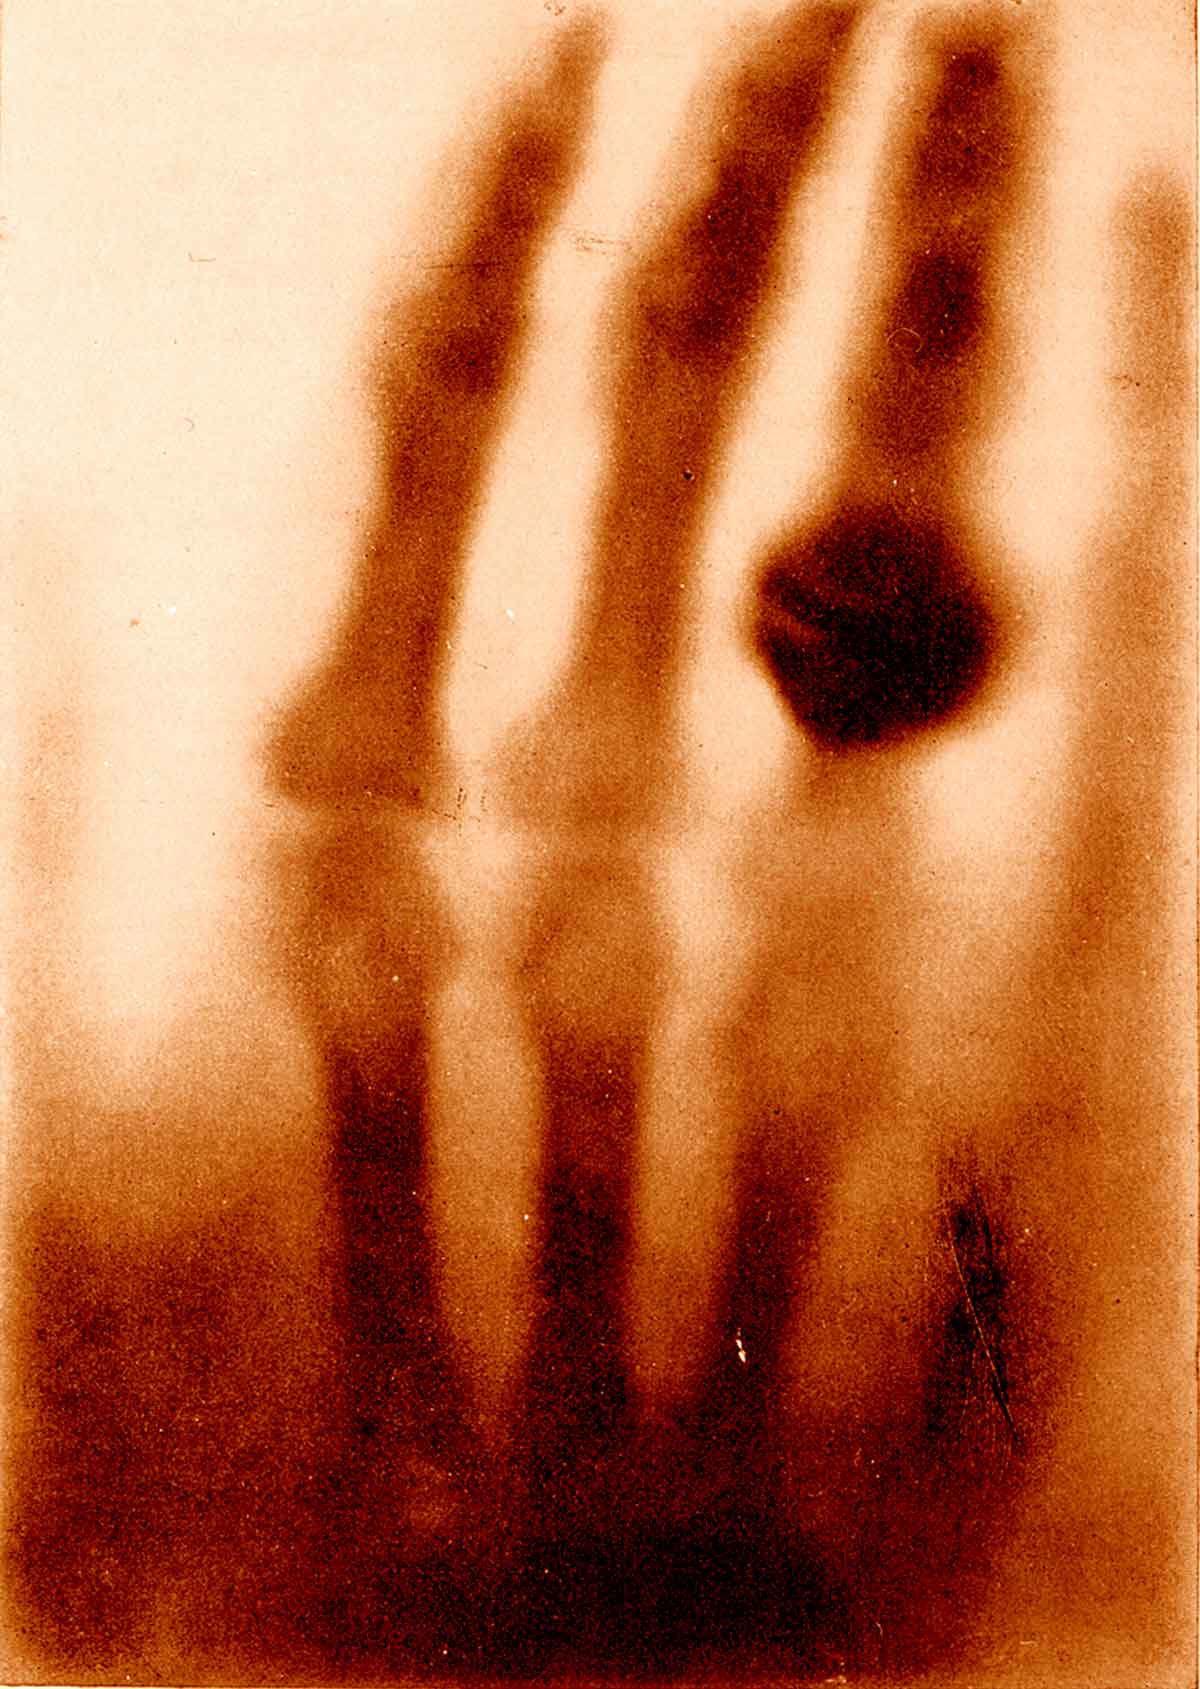 Wilhelm Conrad Roentgen discovers x-rays. This discovery is thought of as one of the greatest technological accomplishments of all time. It made a huge impact on cancer detection and treatment.Four years later (1899) Tage Anton Ultimus Sjogren successfully treats cancer with x-rays.11Morton, Leslie T., and Moore, Robert J. A Chronology of Medicine and Related Sciences. Aldershot, England: Scholar Press, 1997      